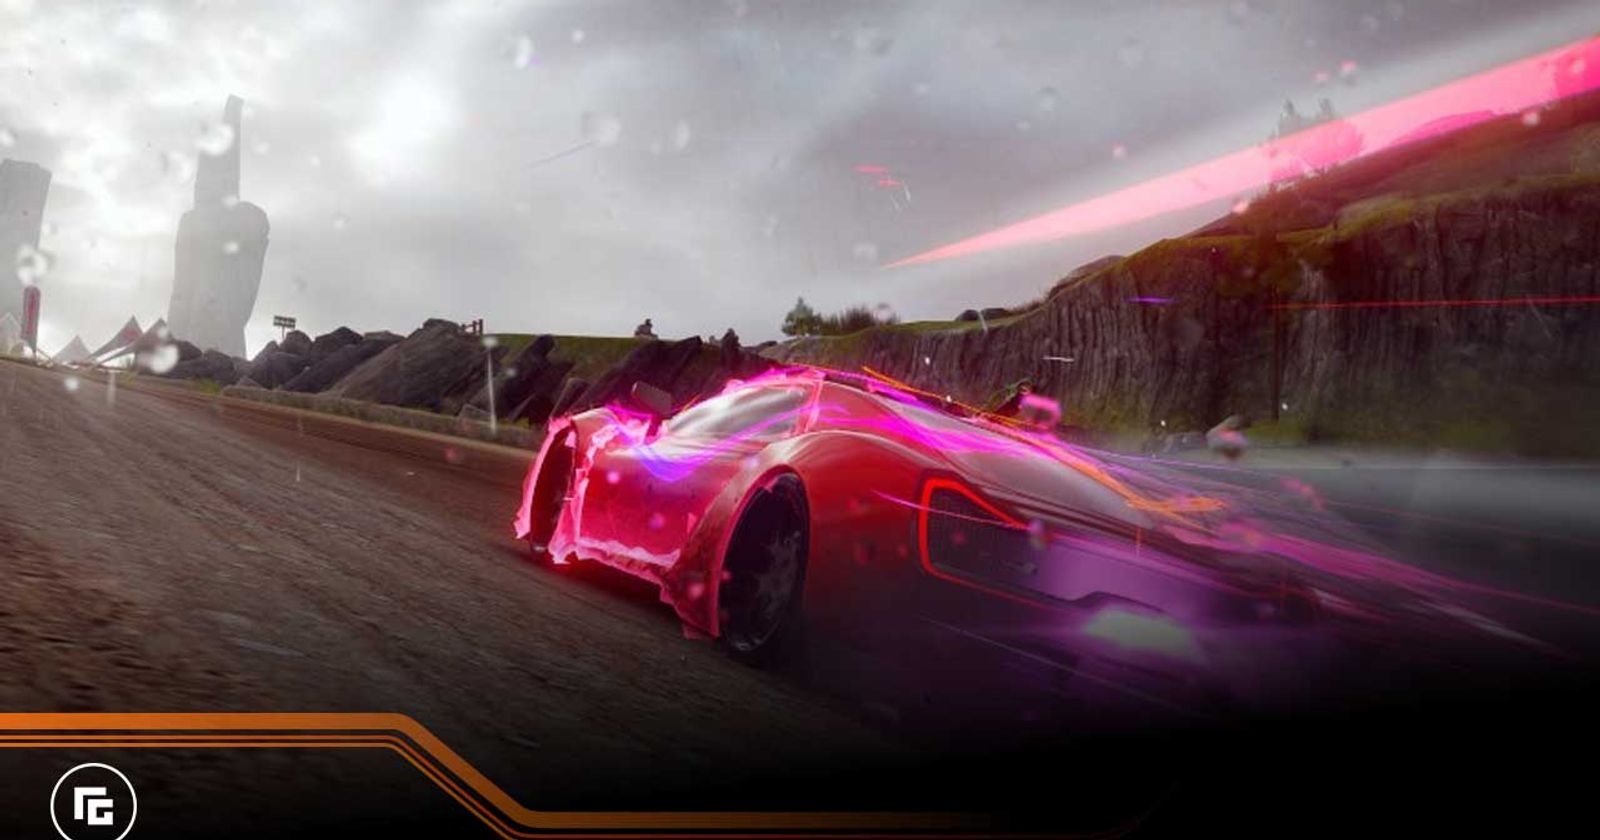 Can you play Asphalt 9 with mobile data?